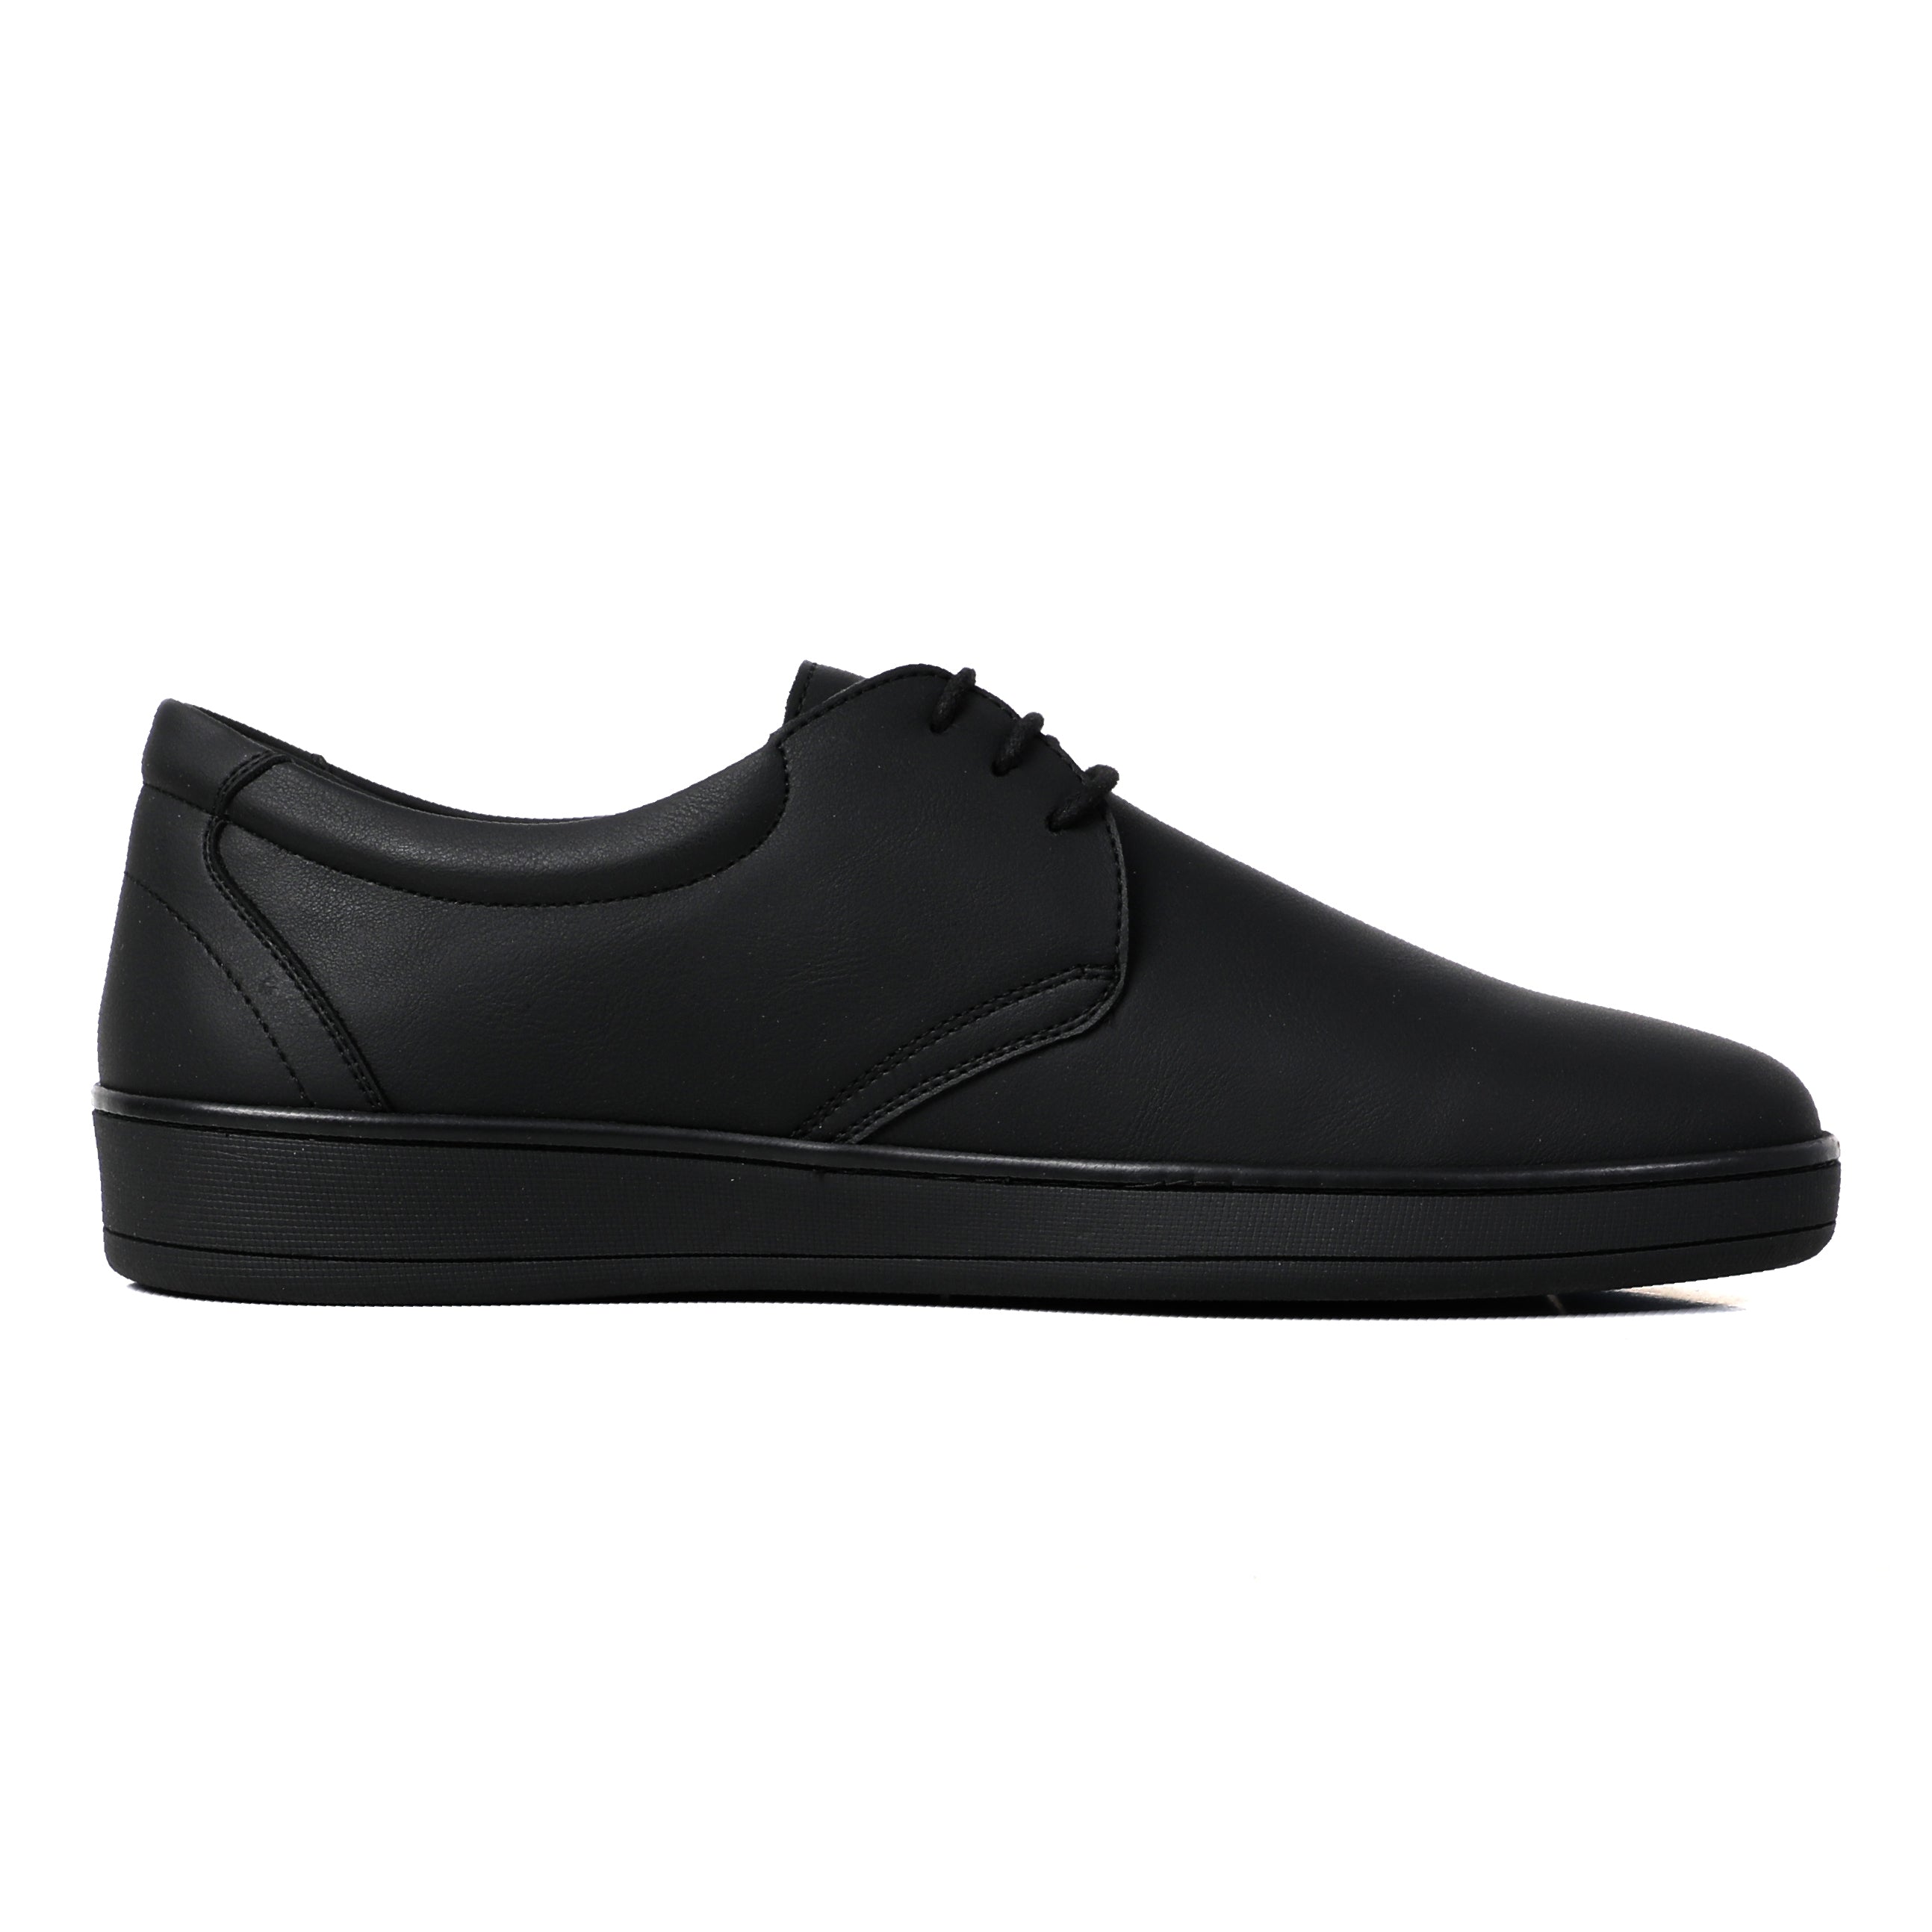 Men Casual Black Shoes With Lace-Tie Up